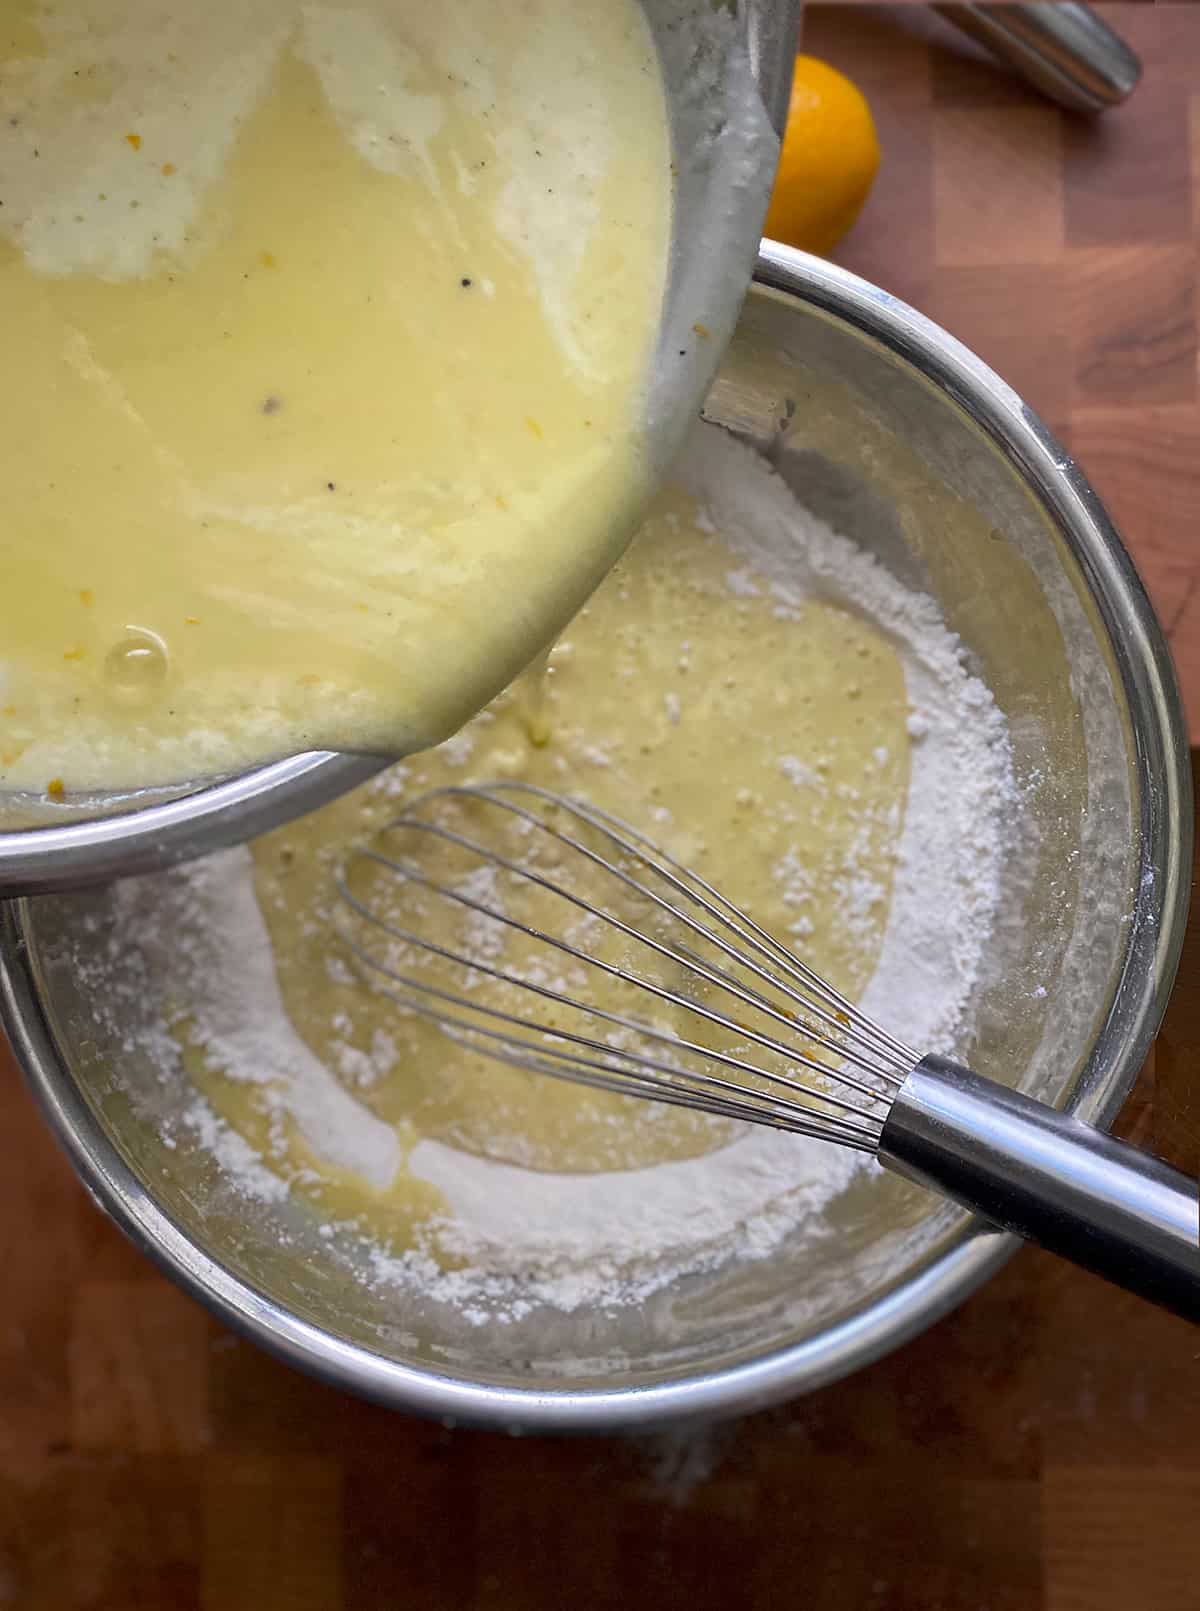 Pouring eggs and sugar mixture into a bowl with flour.